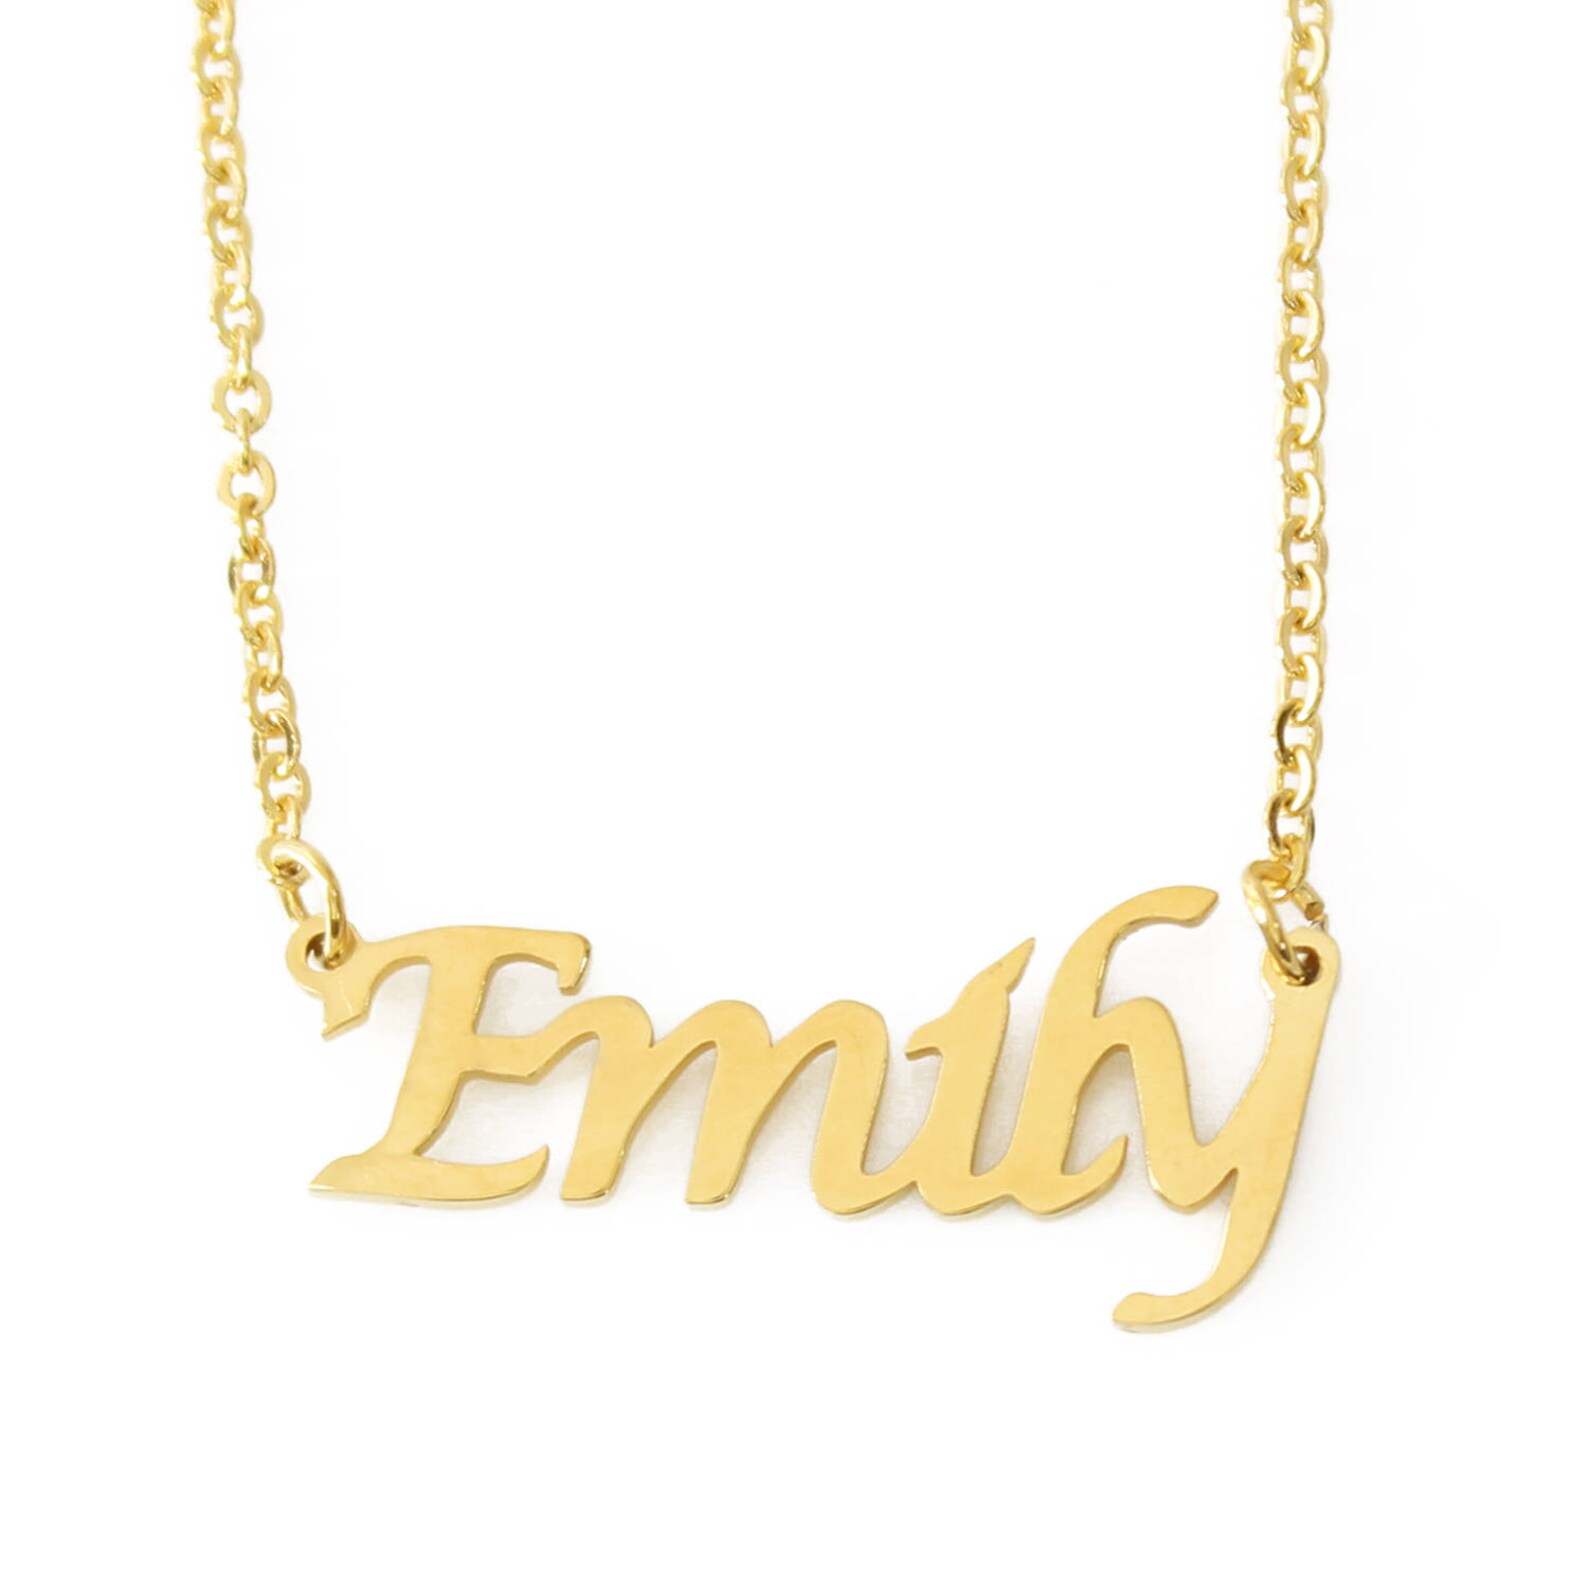 EMILY Gold Name Necklace Personalized Jewellery Free Gift - Etsy